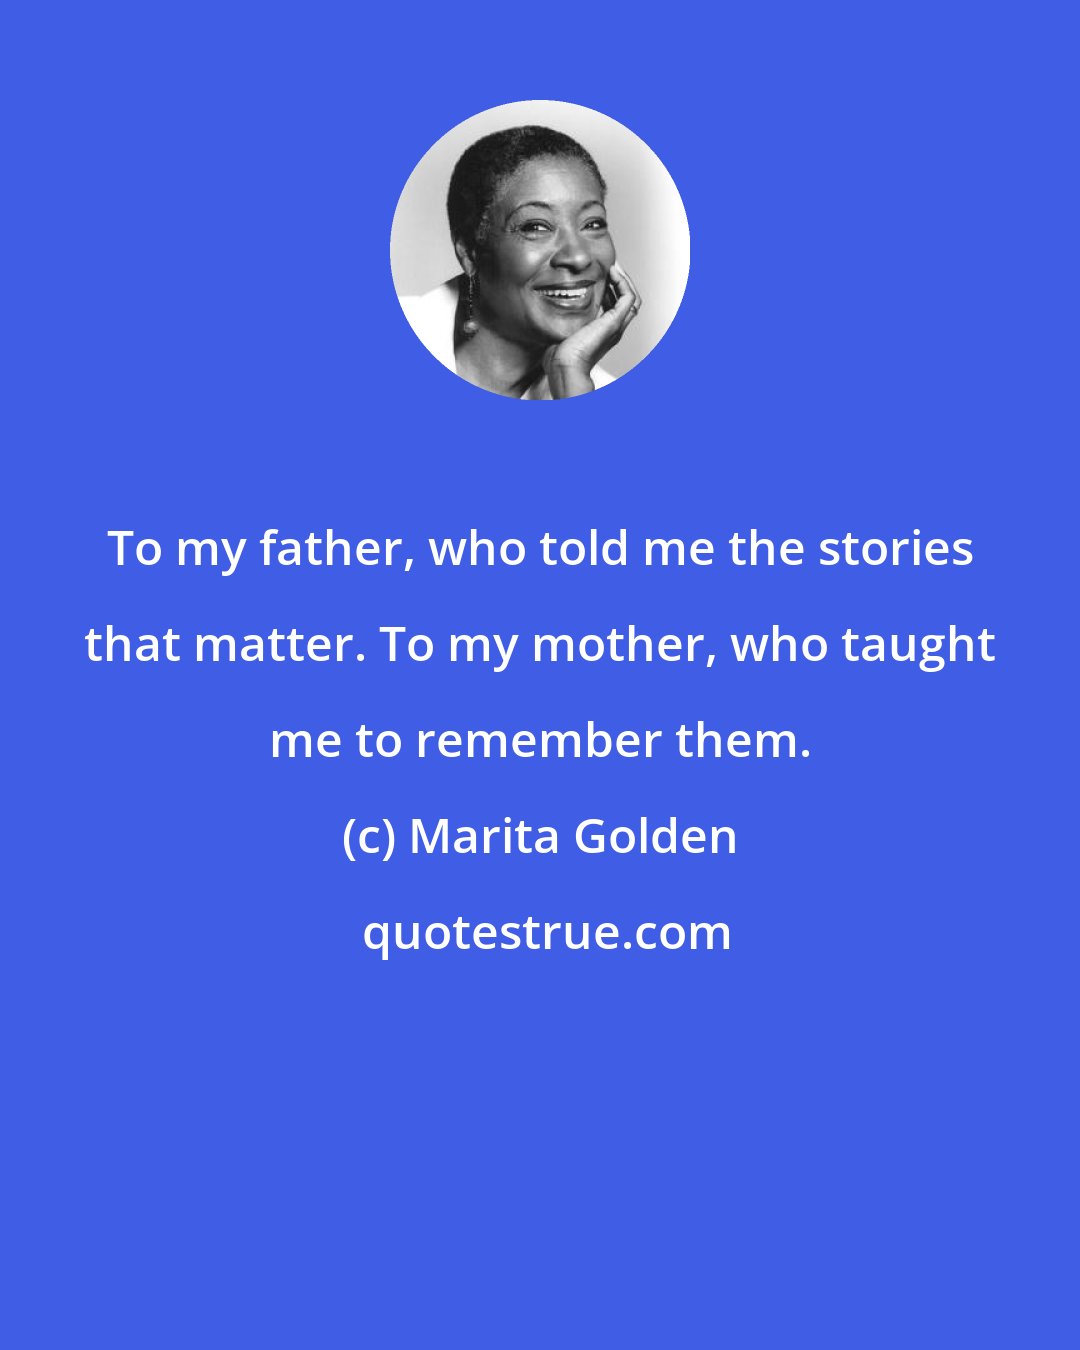 Marita Golden: To my father, who told me the stories that matter. To my mother, who taught me to remember them.